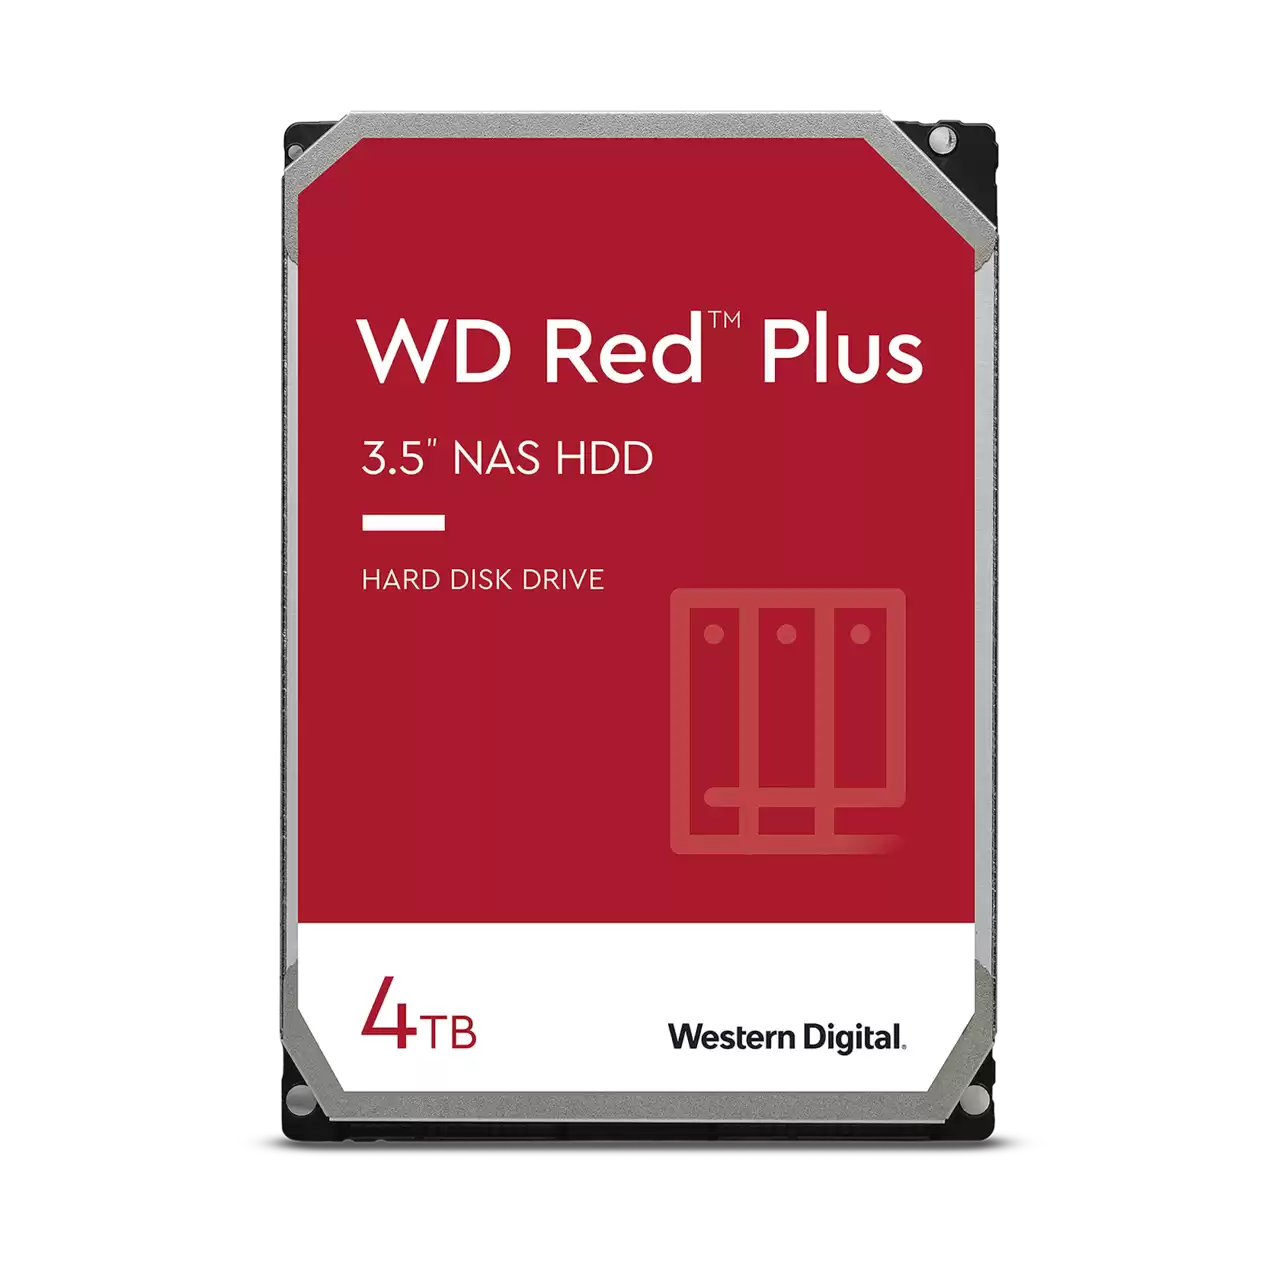 WD Red Plus 4 TB NAS Hard Drive 3.5 WD40EFZX